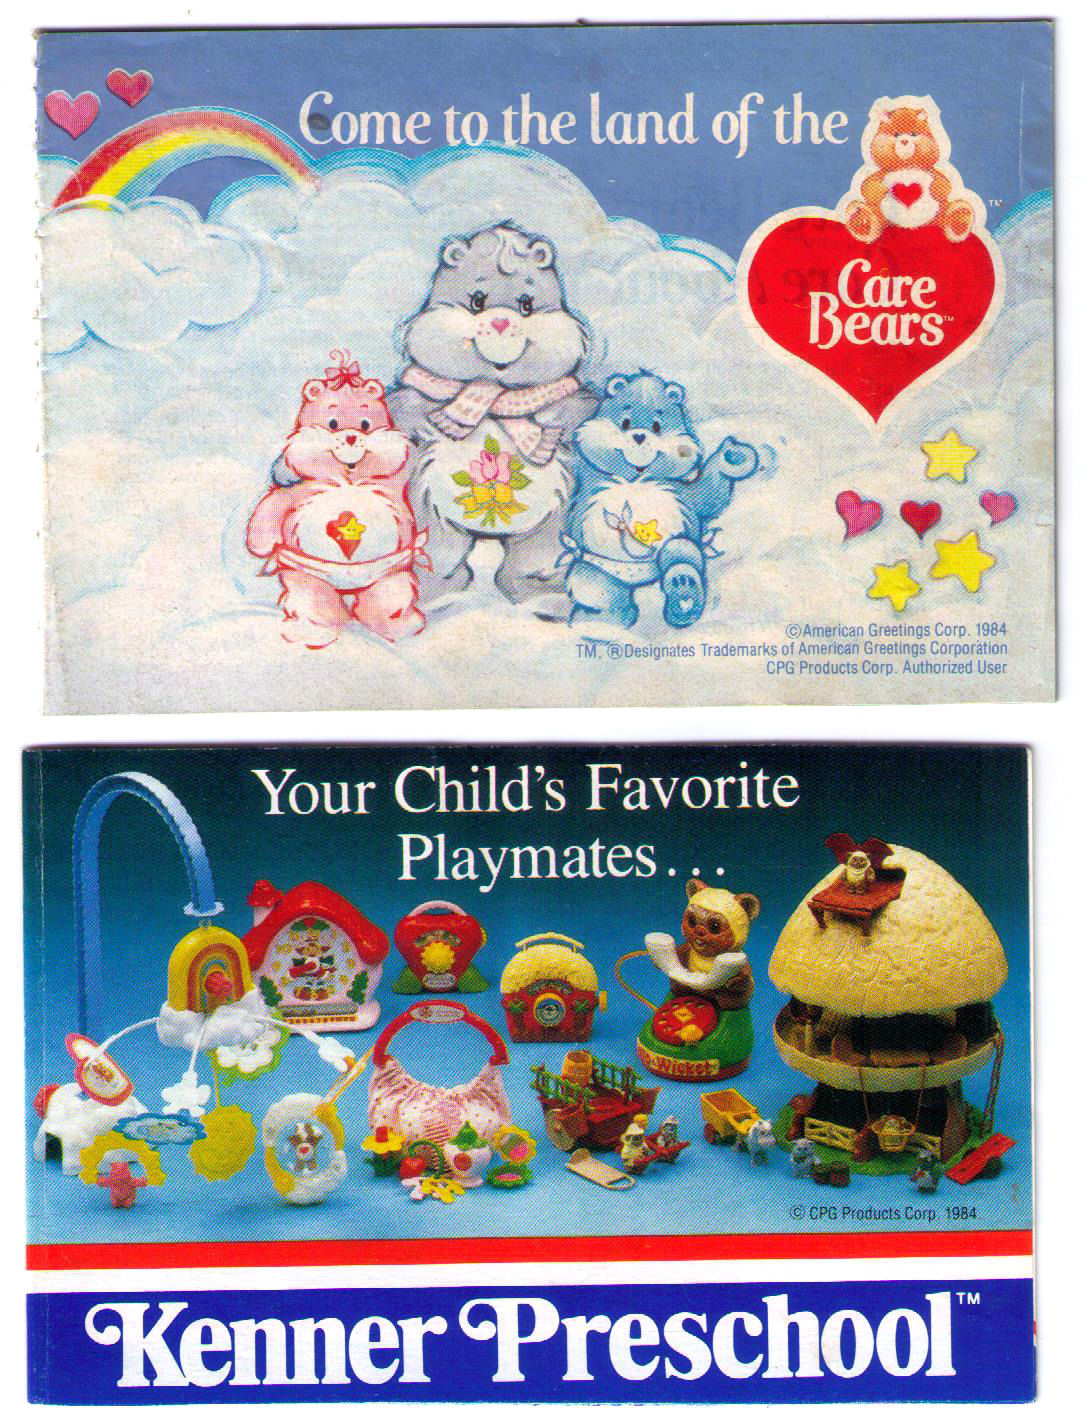 Come to the Land of Care Bears Catalog 1984 Kenner + Preschool Booklet